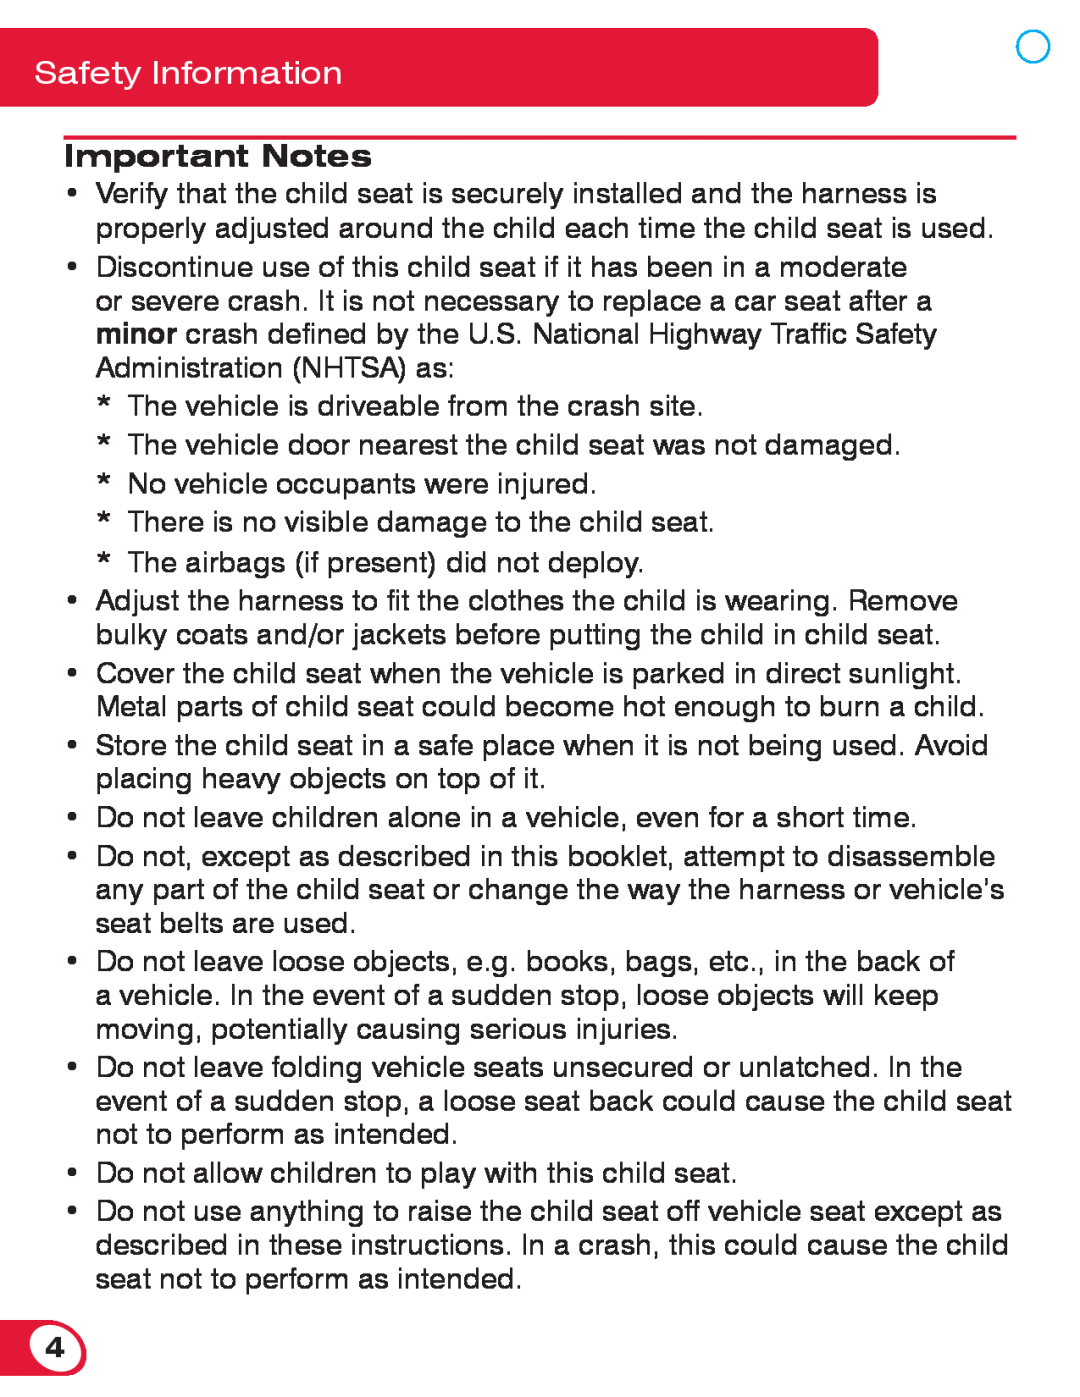 Britax 70 CS manual Safety Information, Important Notes 